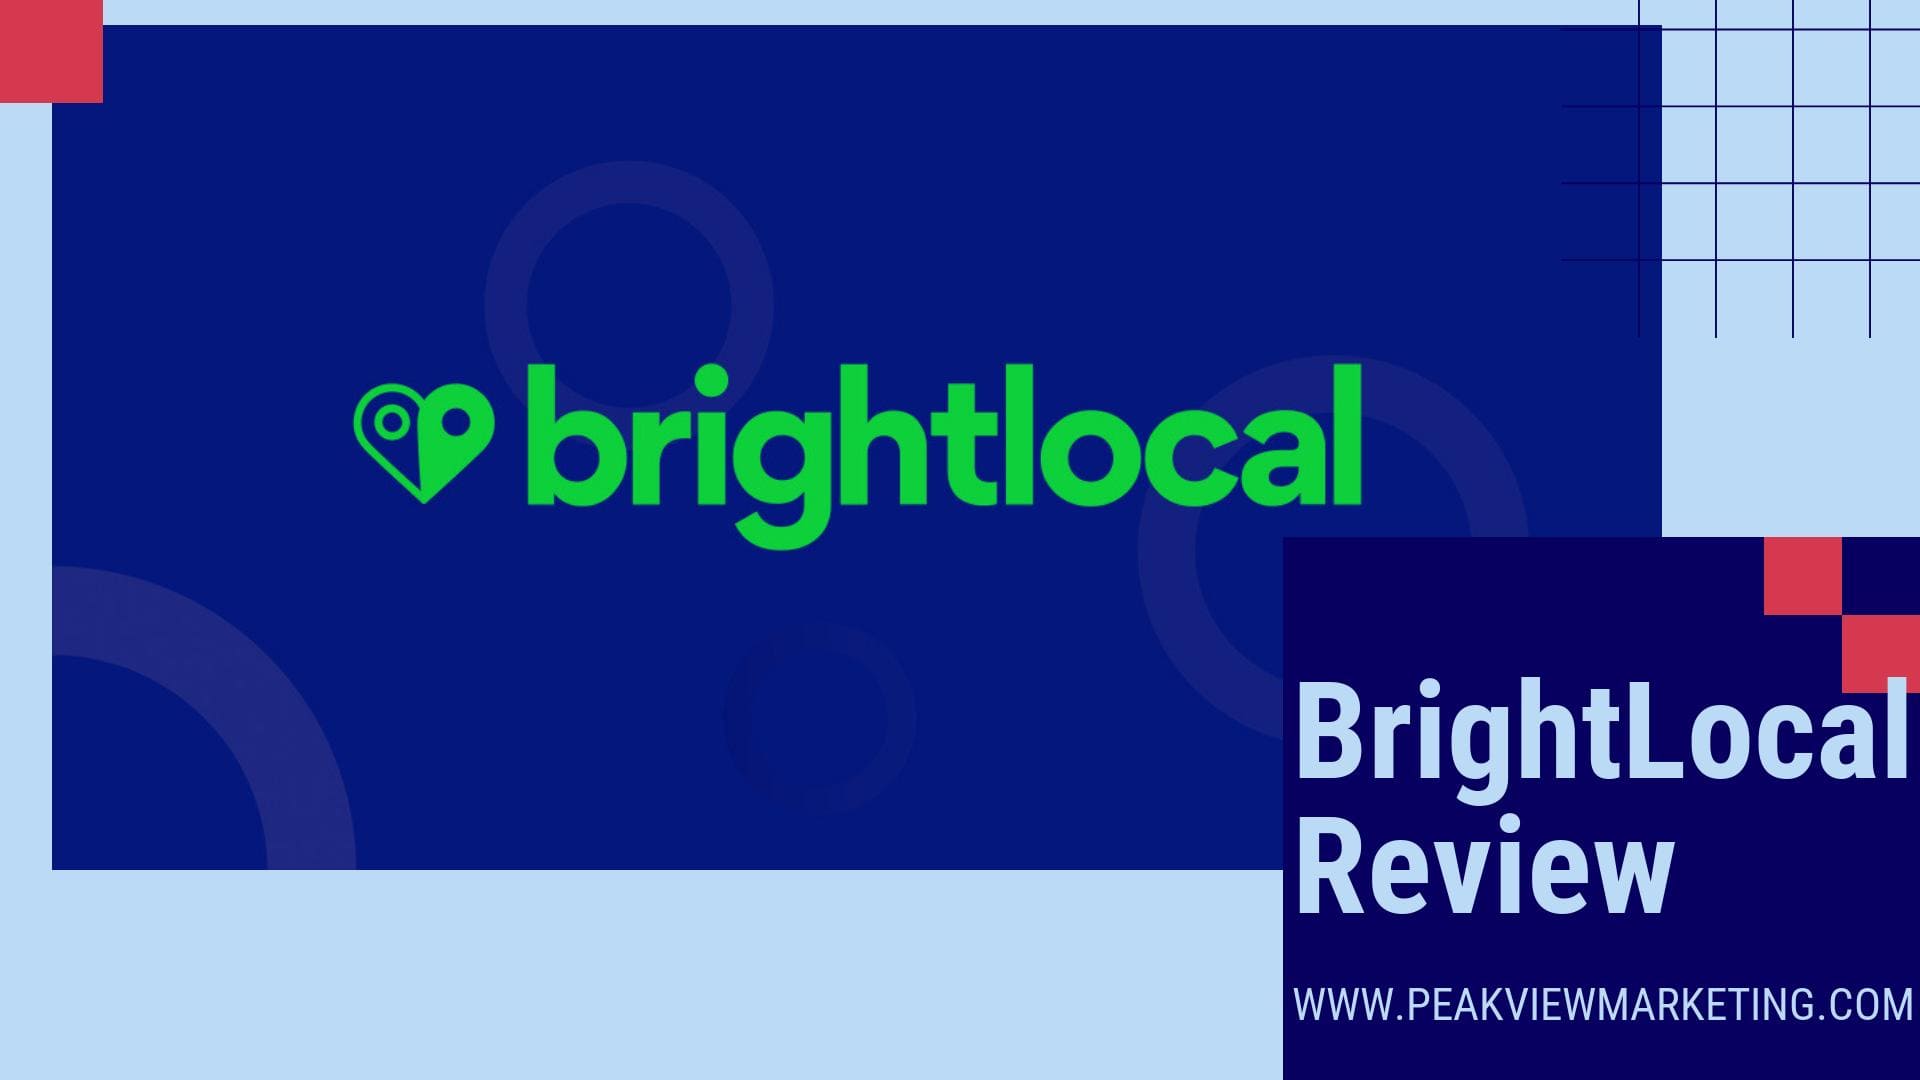 Bright Local Review Image